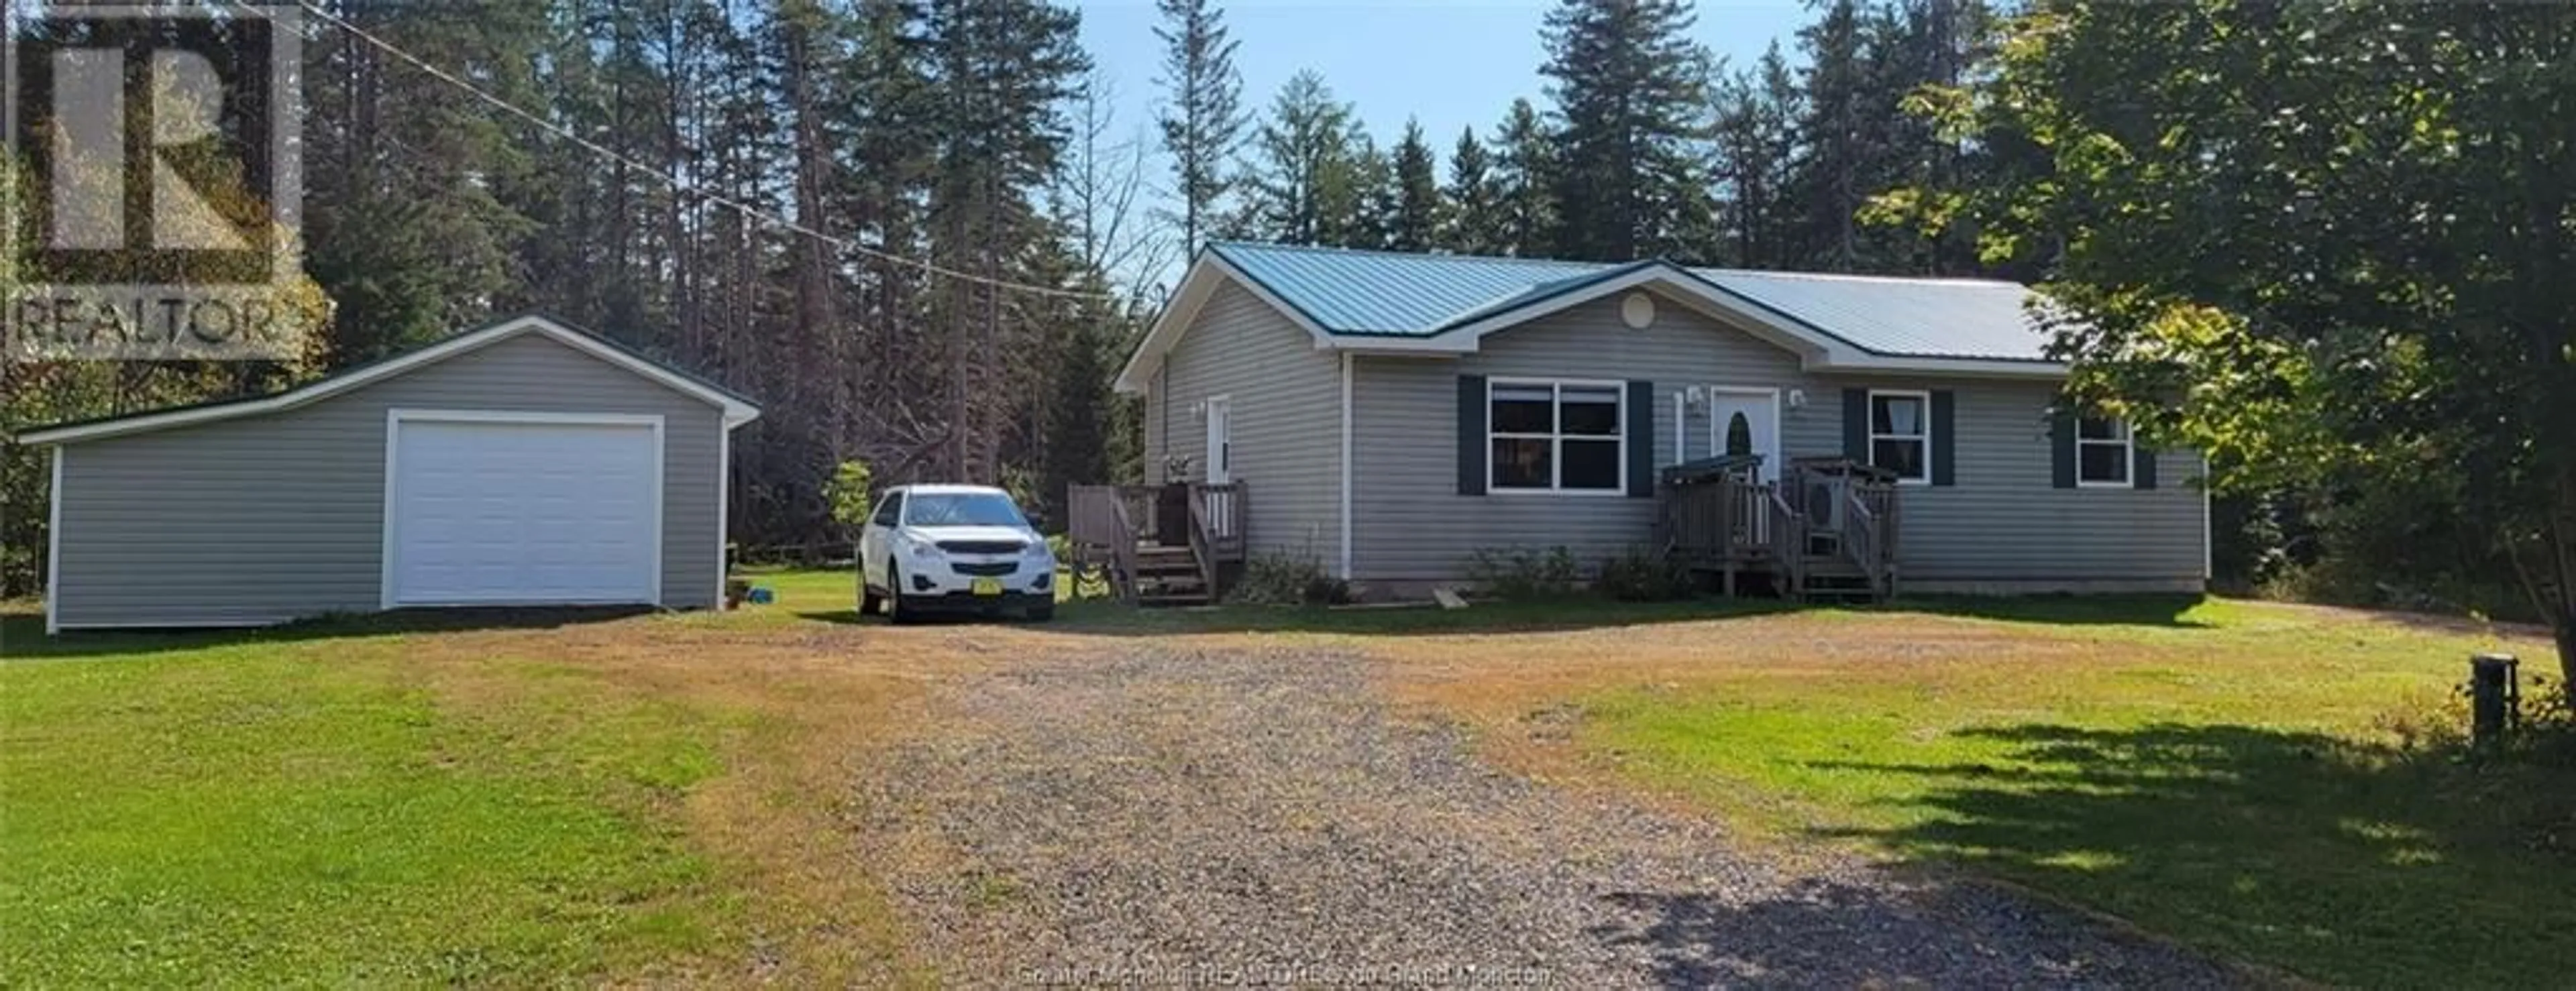 Cottage for 254 Portage Vale RD, Penobsquis New Brunswick E4G2Y6